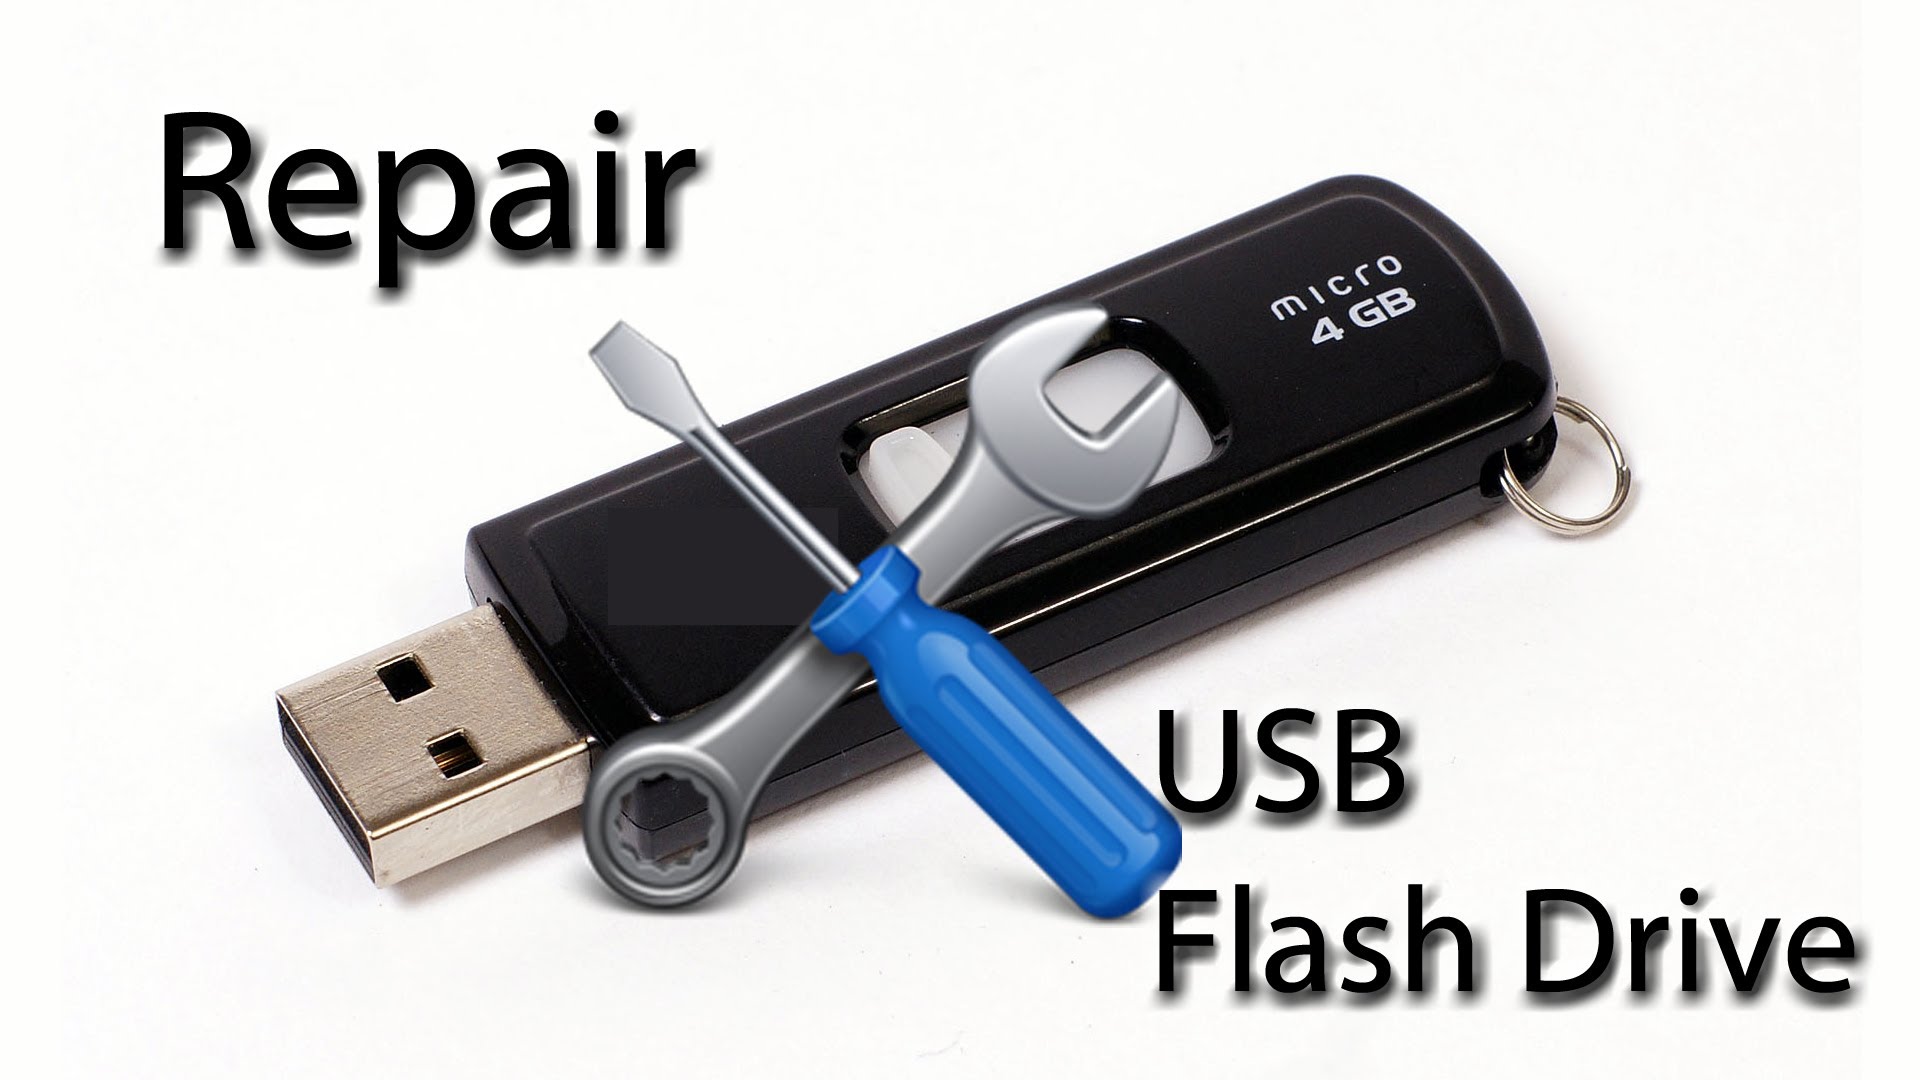 usb flash recovery software free download